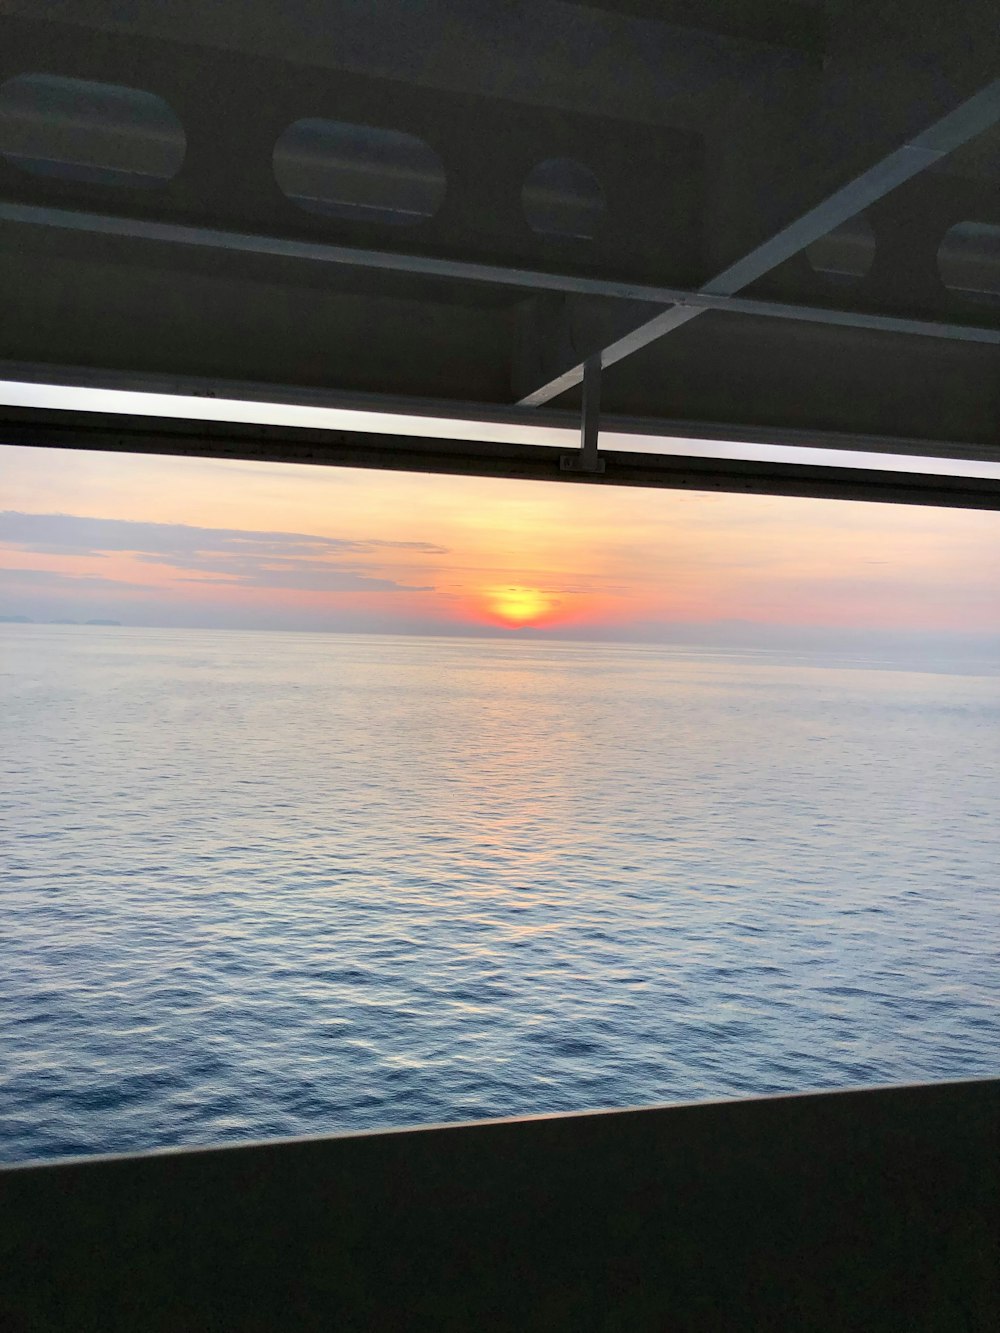 the sun is setting over the ocean from a boat